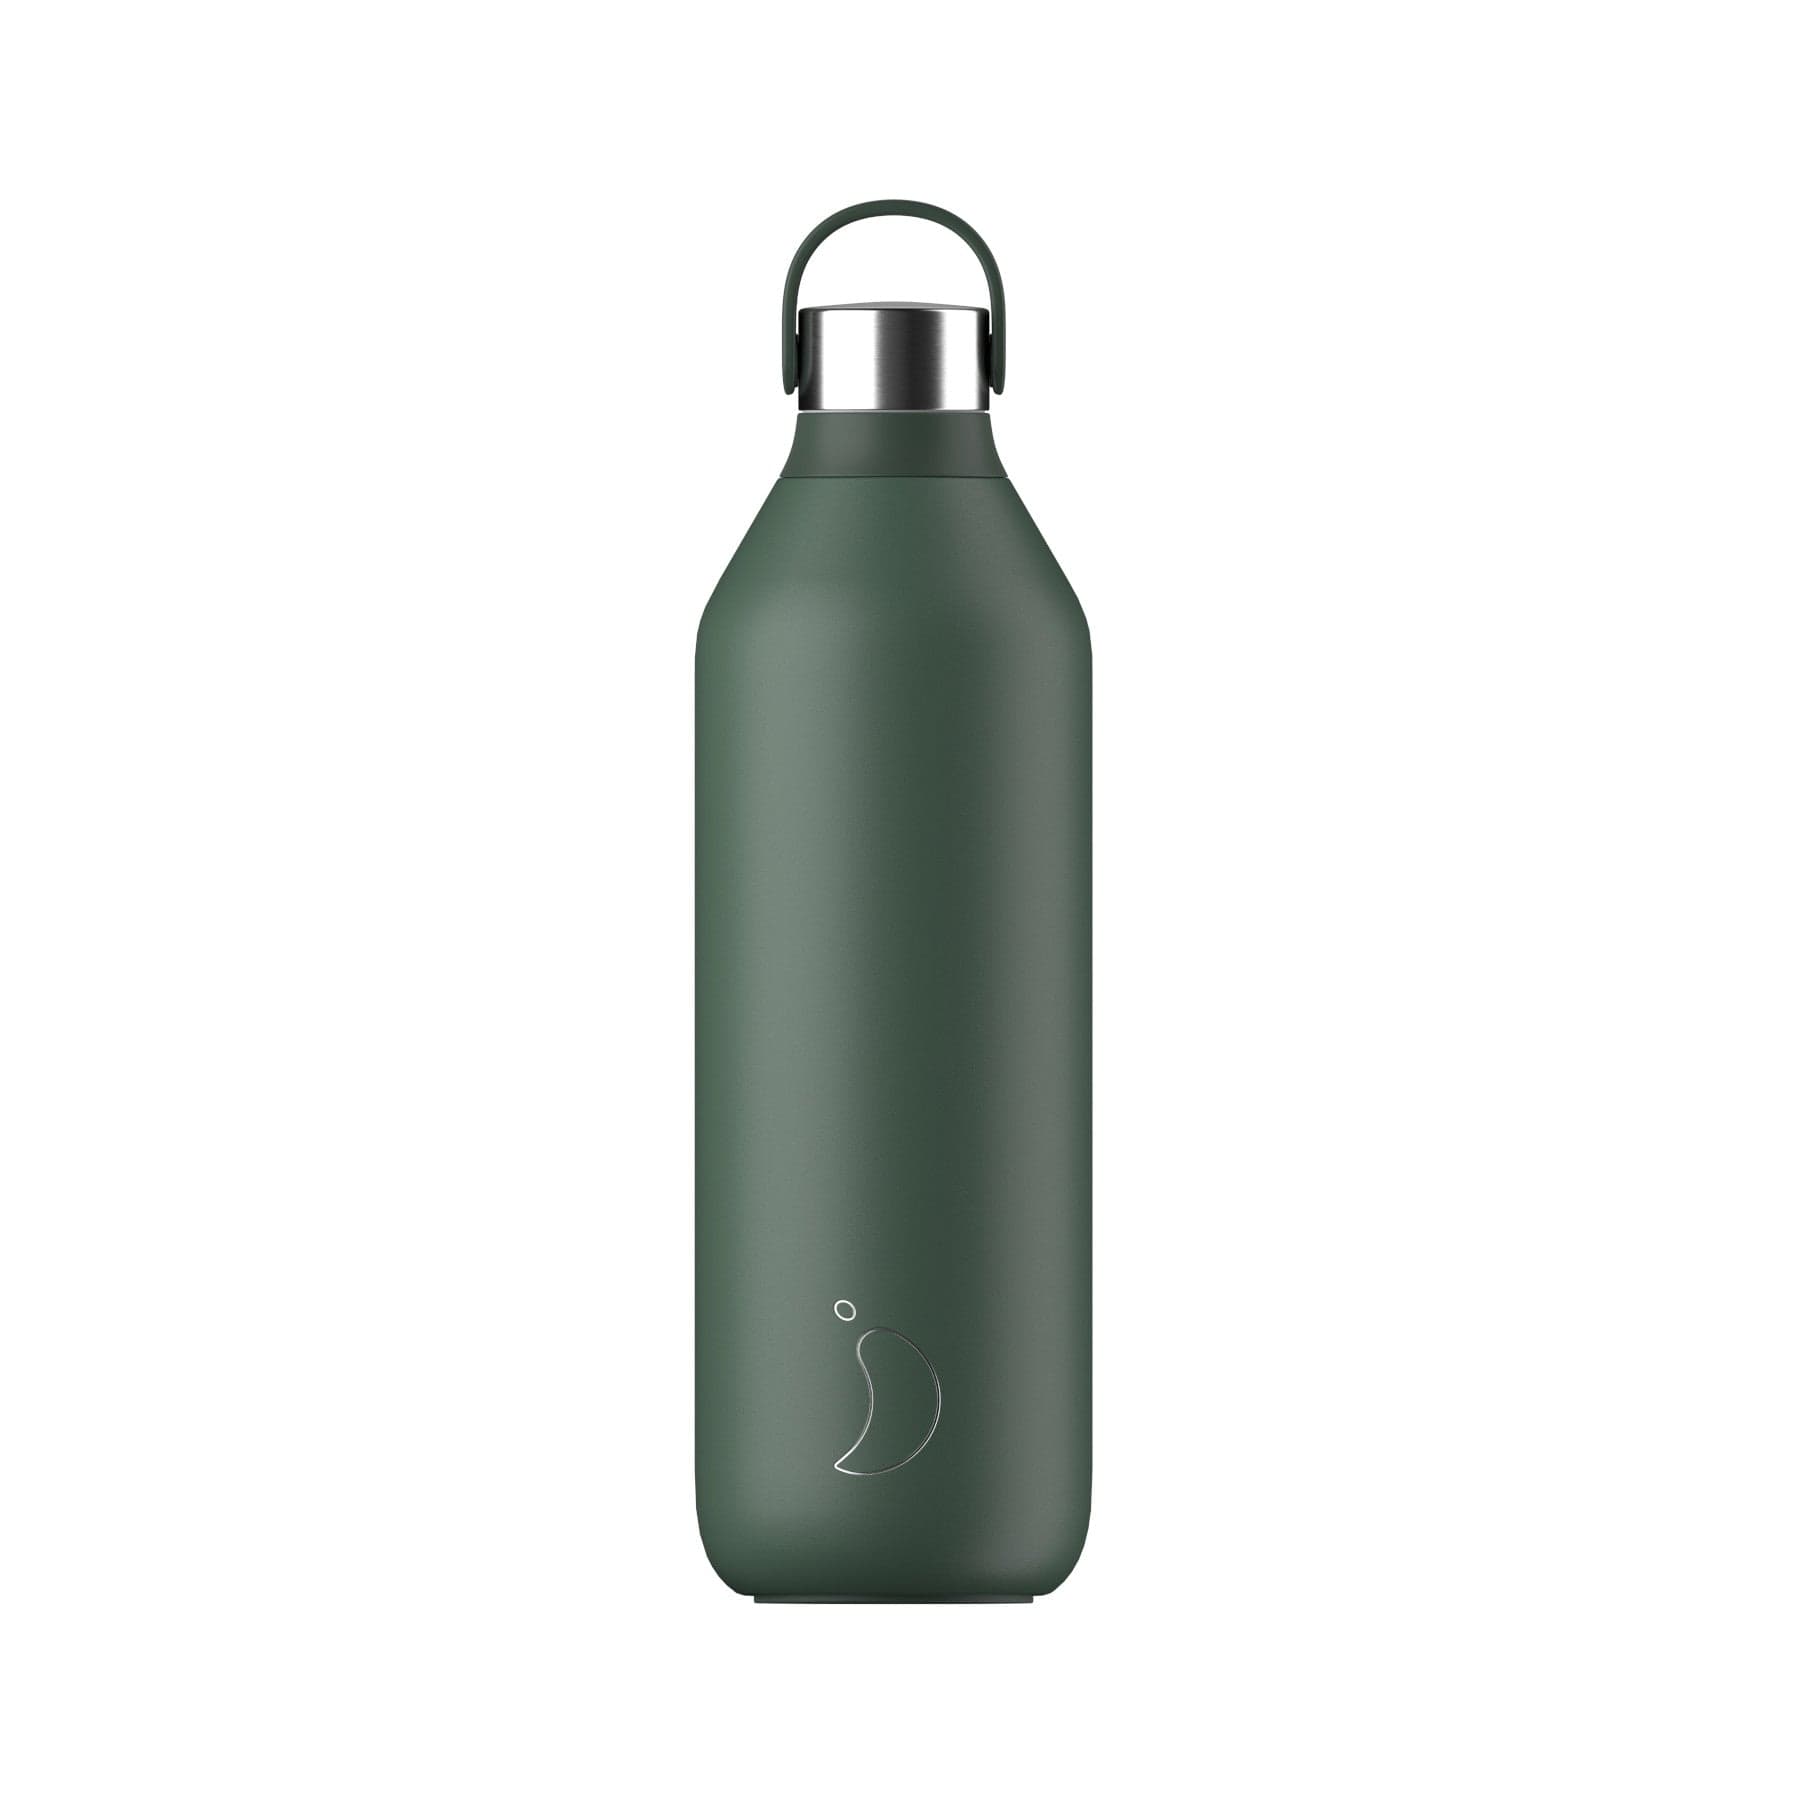 Green insulated stainless steel water bottle with a silver cap and minimalistic fish logo on a white background